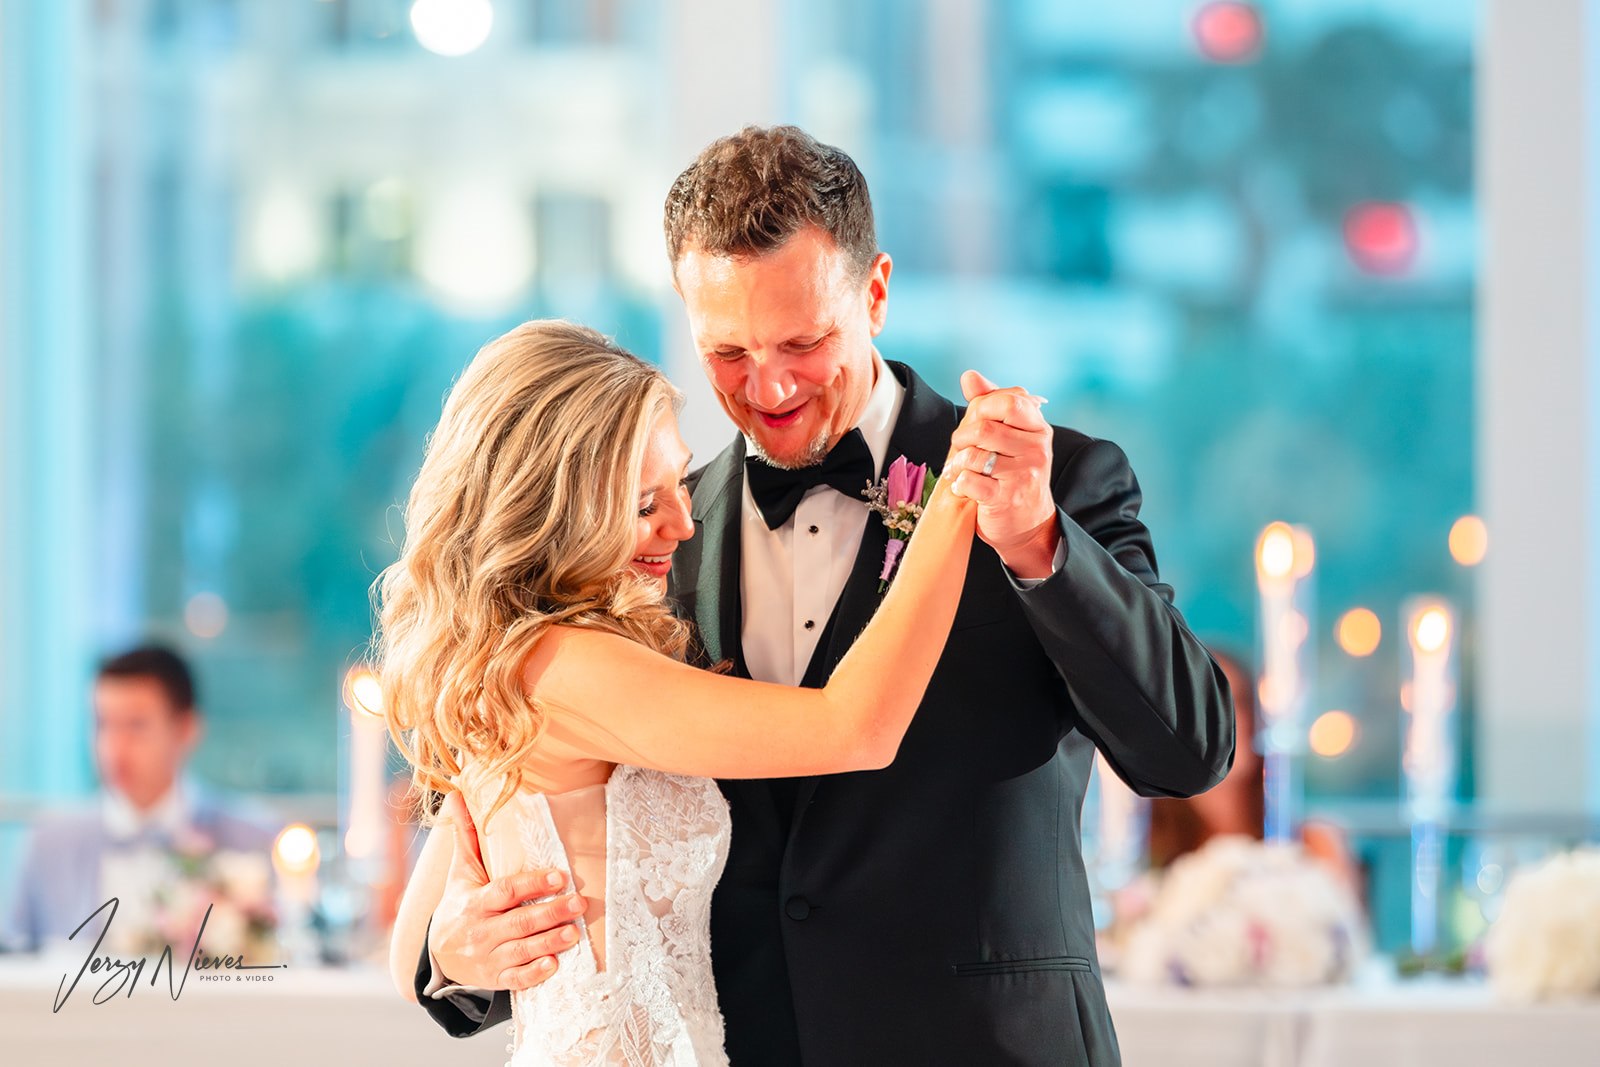 Bride dancing with her father during the reception, surrounded by guests at the Dr. Phillips Center for Performing Arts.